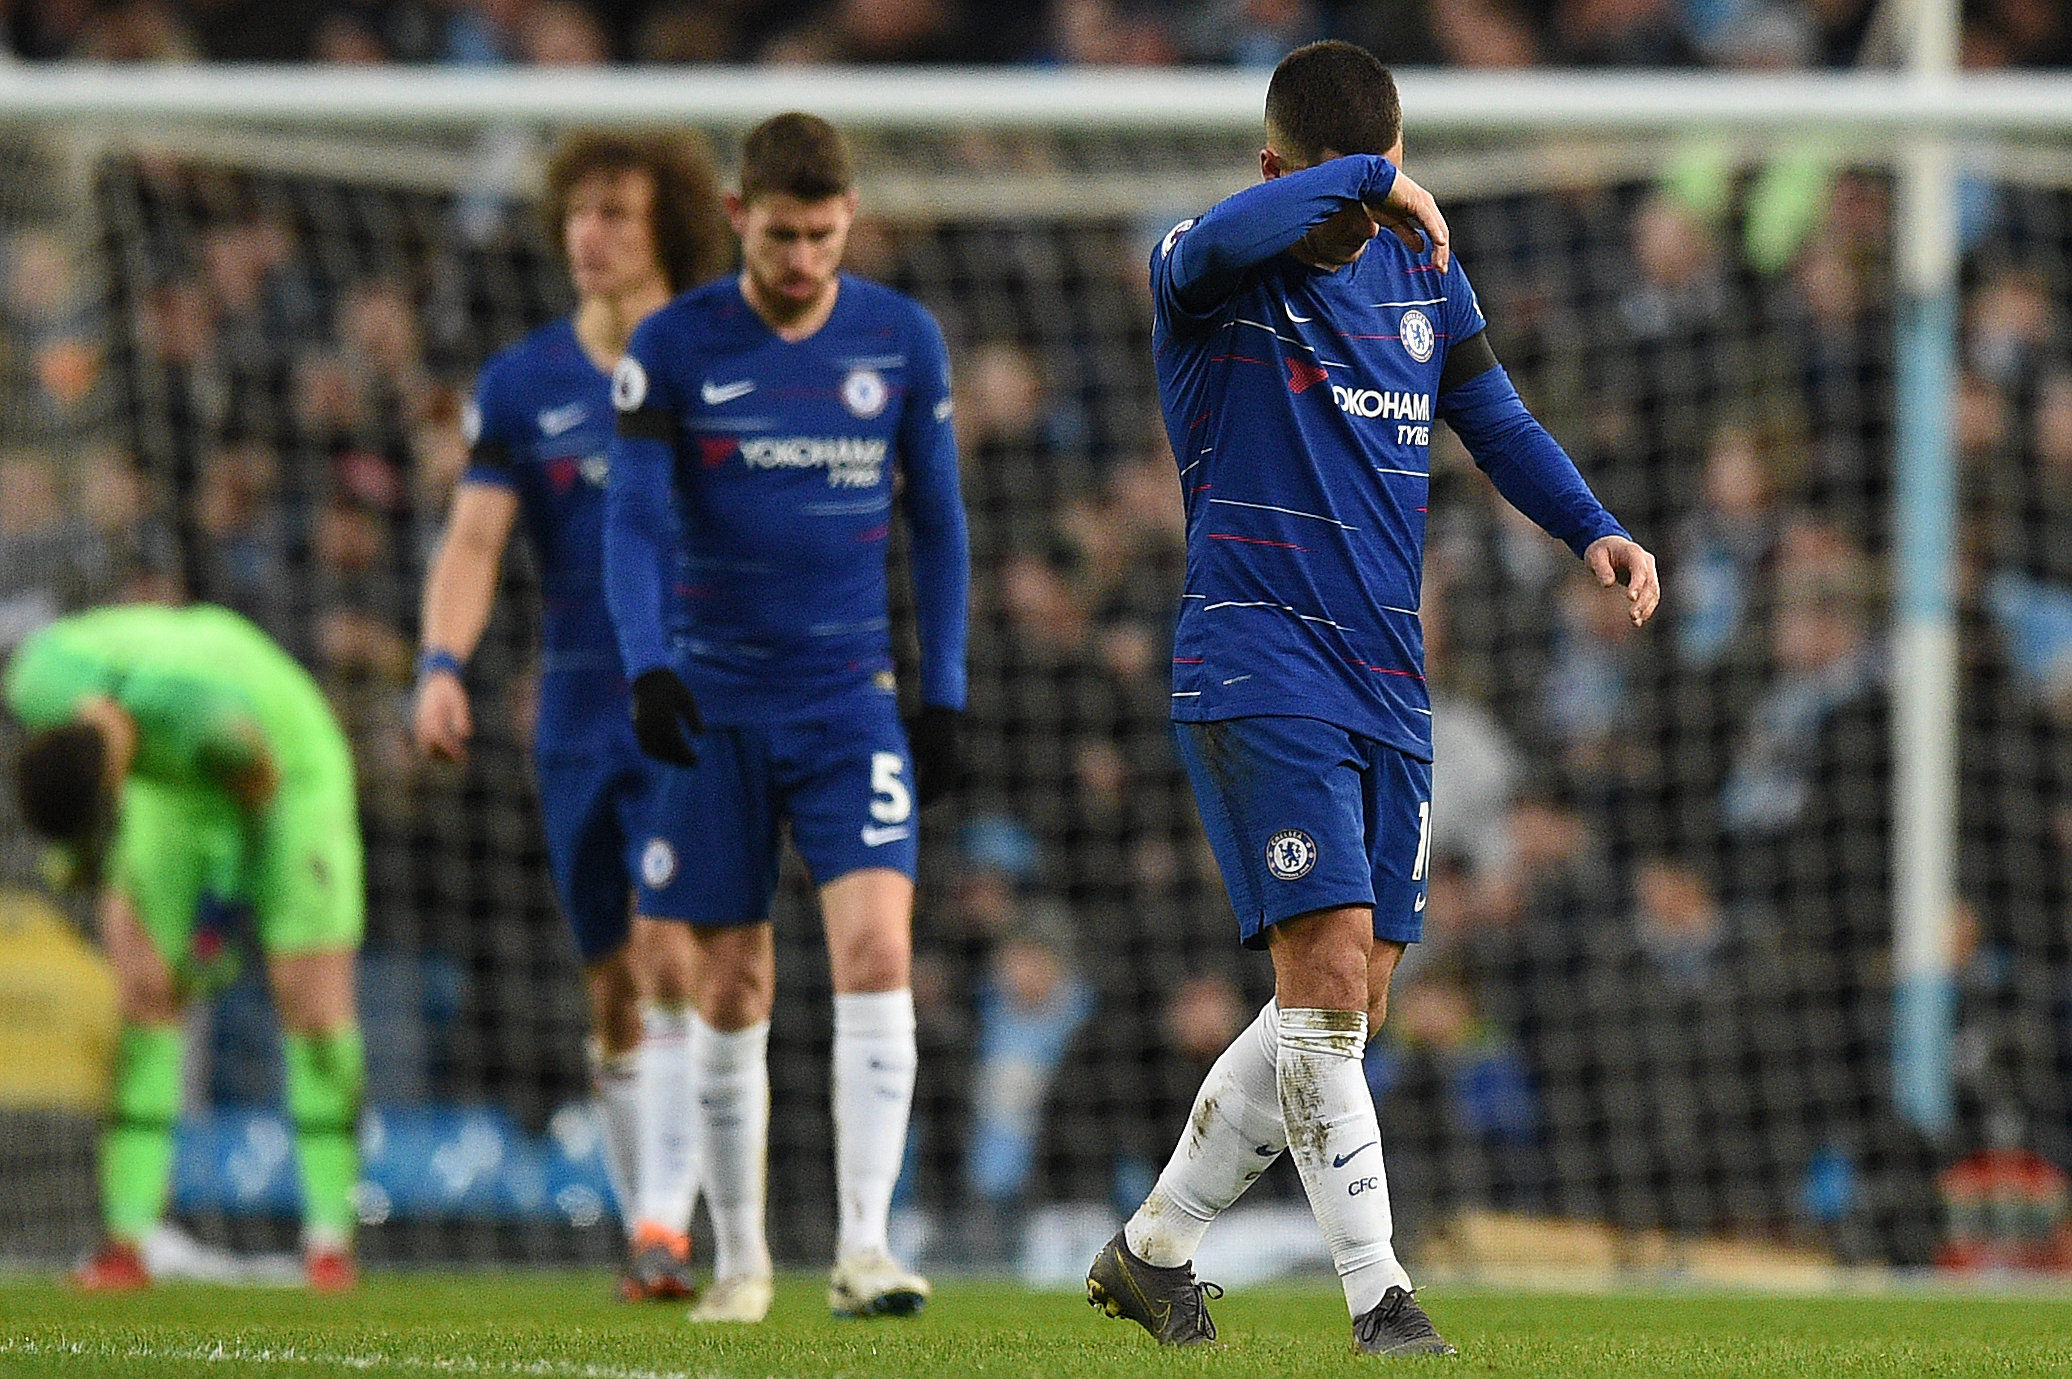 Chelsea's Belgian midfielder Eden Hazard (R) reacts after Manchester City's Argentinian striker Sergio Aguero scored from the penalty spot during the English Premier League football match between Manchester City and Chelsea at the Etihad Stadium in Manchester, north west England, on February 10, 2019. (Photo by Oli SCARFF / AFP) / RESTRICTED TO EDITORIAL USE. No use with unauthorized audio, video, data, fixture lists, club/league logos or 'live' services. Online in-match use limited to 120 images. An additional 40 images may be used in extra time. No video emulation. Social media in-match use limited to 120 images. An additional 40 images may be used in extra time. No use in betting publications, games or single club/league/player publications. /         (Photo credit should read OLI SCARFF/AFP/Getty Images)